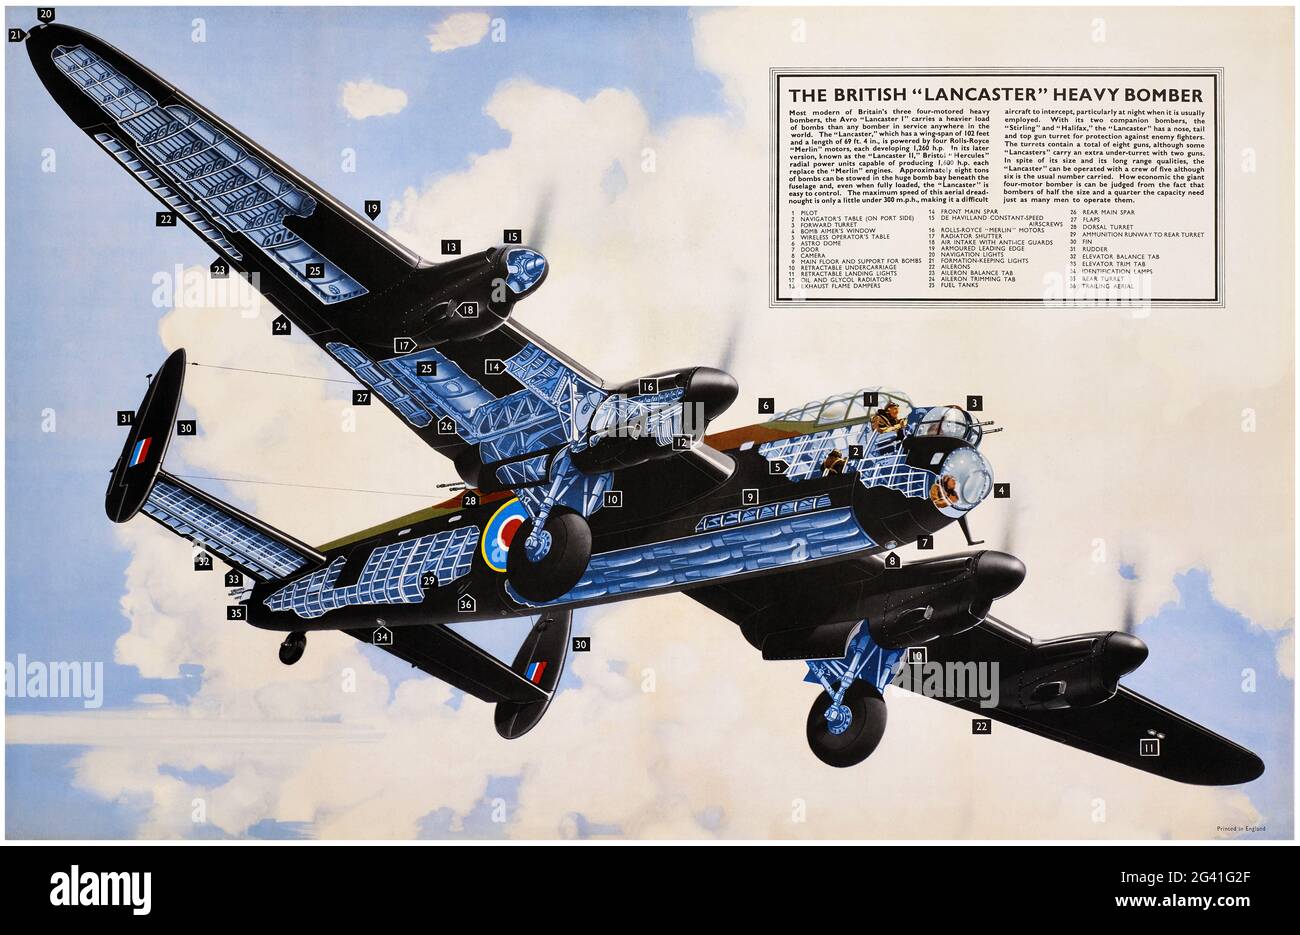 The British 'Lancaster' Heavy Bomber. Artist unknown. Restored vintage poster published in 1942 in the UK. Stock Photo